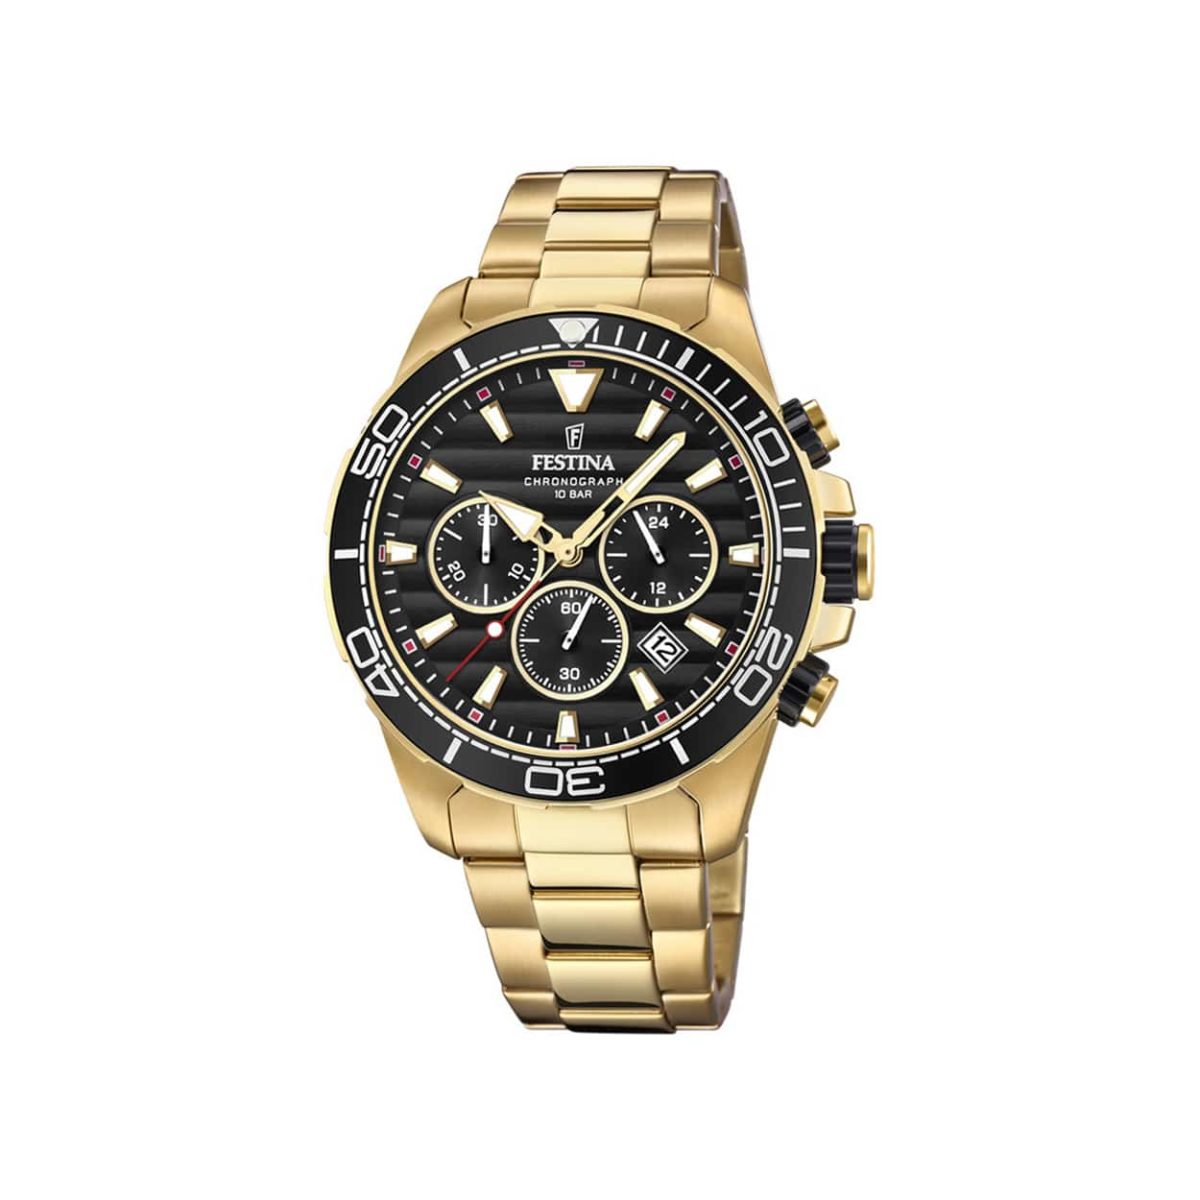 Festina Chronograph Gold Stainless Steel Men's Watch - F20364/3